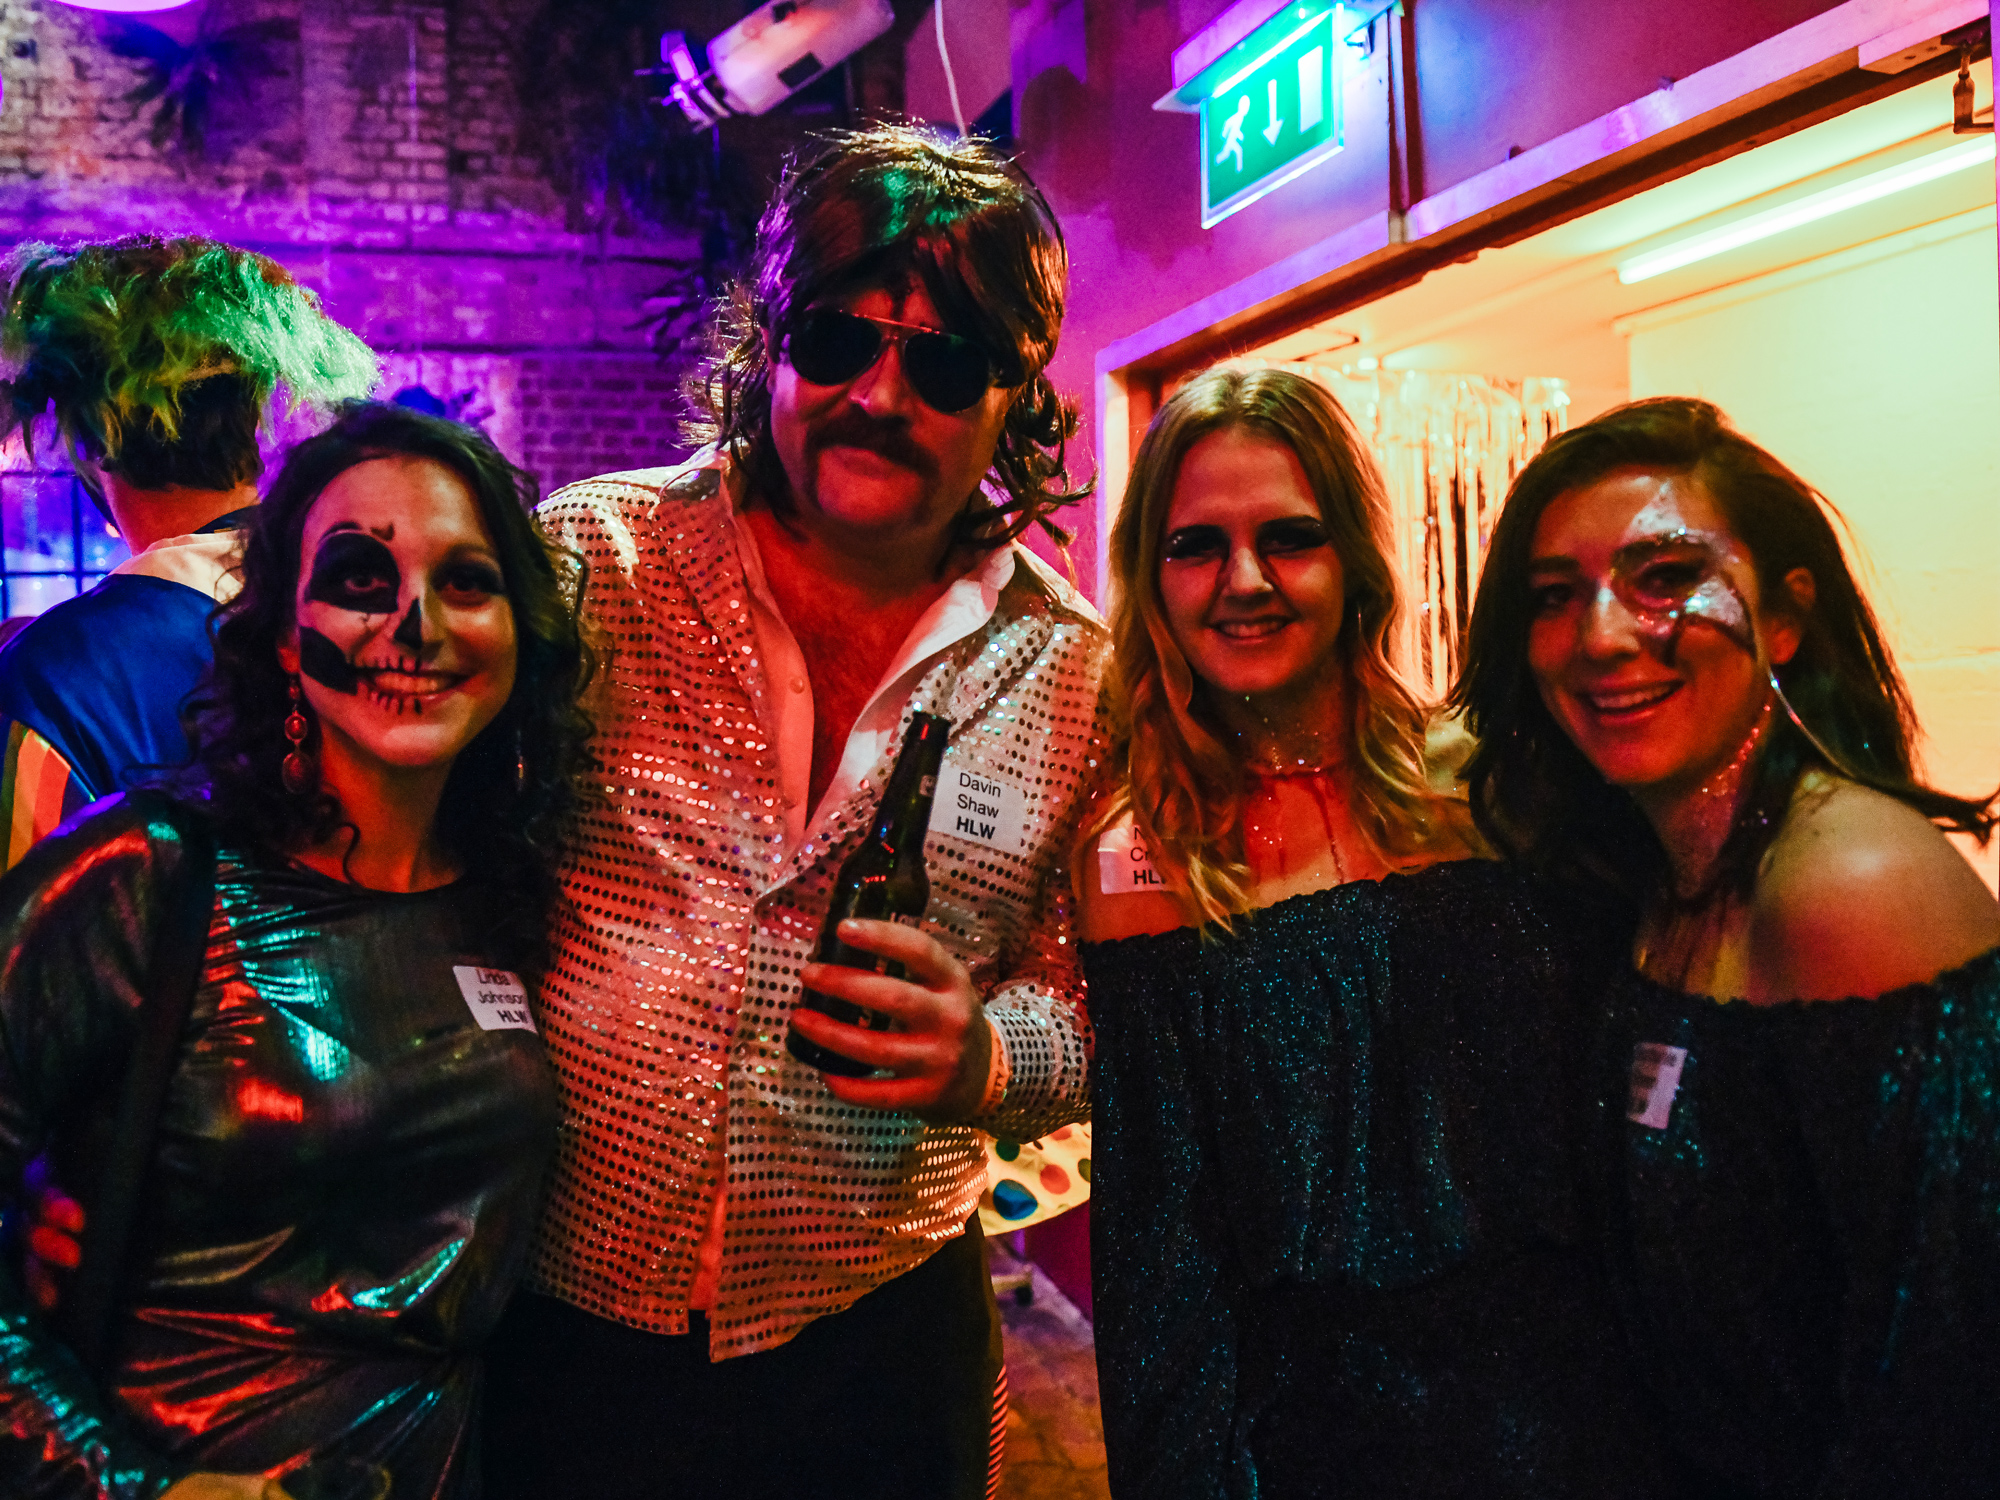 A group of costumed individuals at a Halloween event, one in a bright pink wig, socializing with drinks.